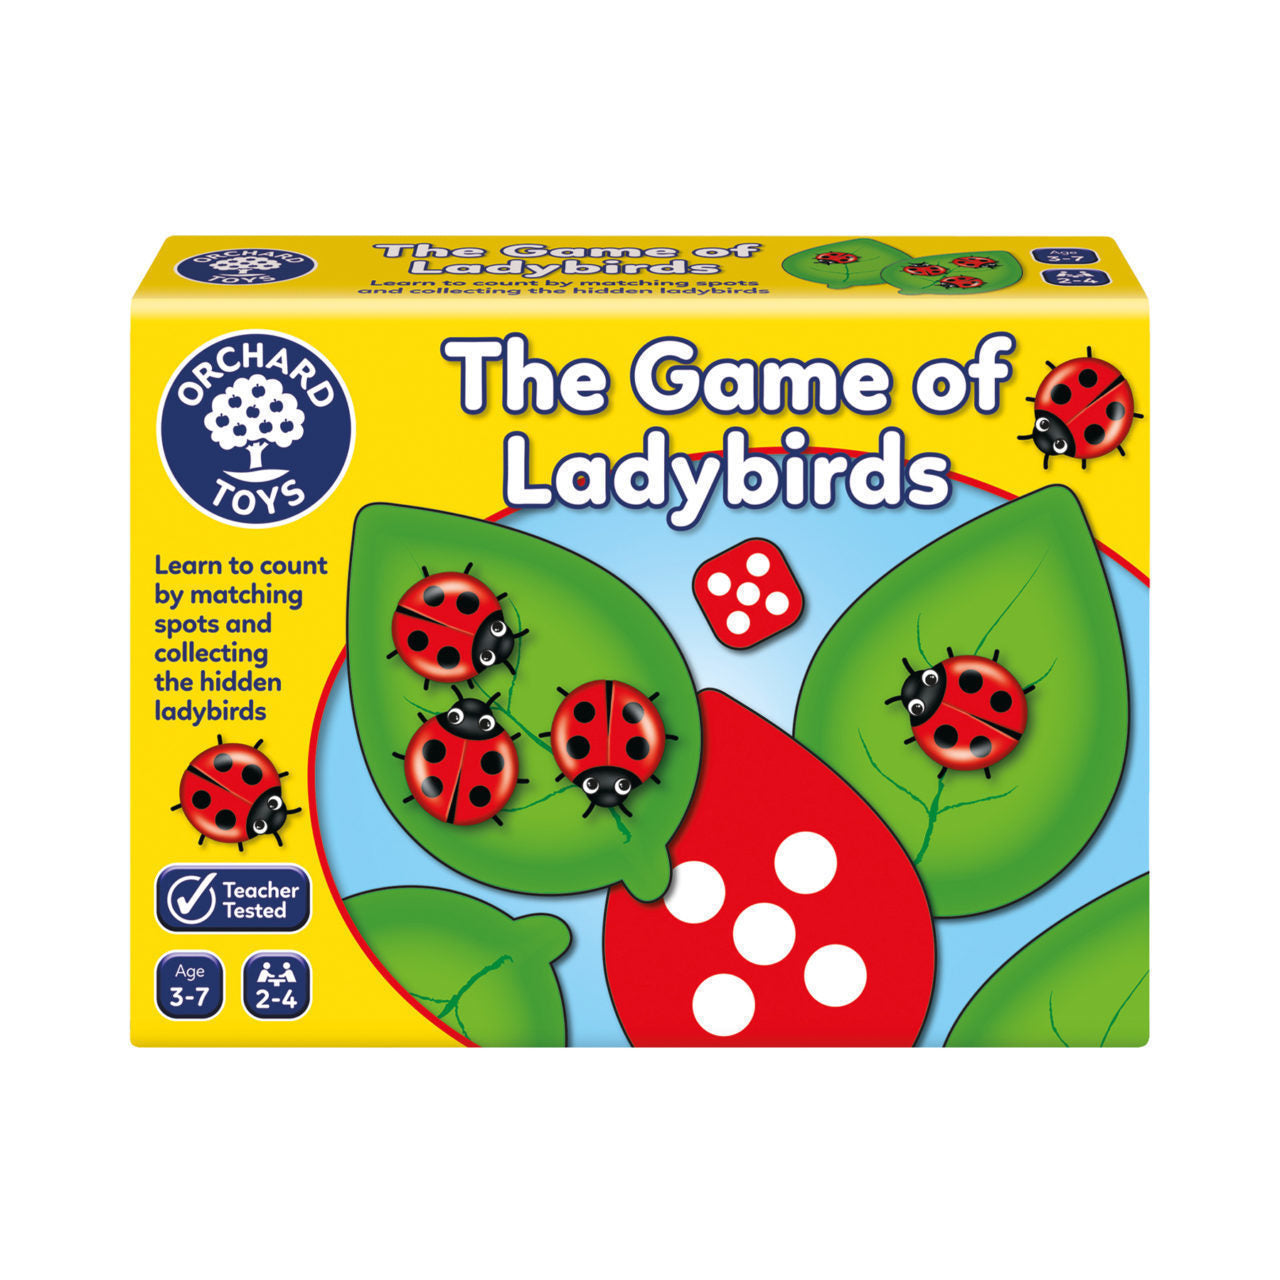 orchard-toys-the-game-of-ladybirds-1